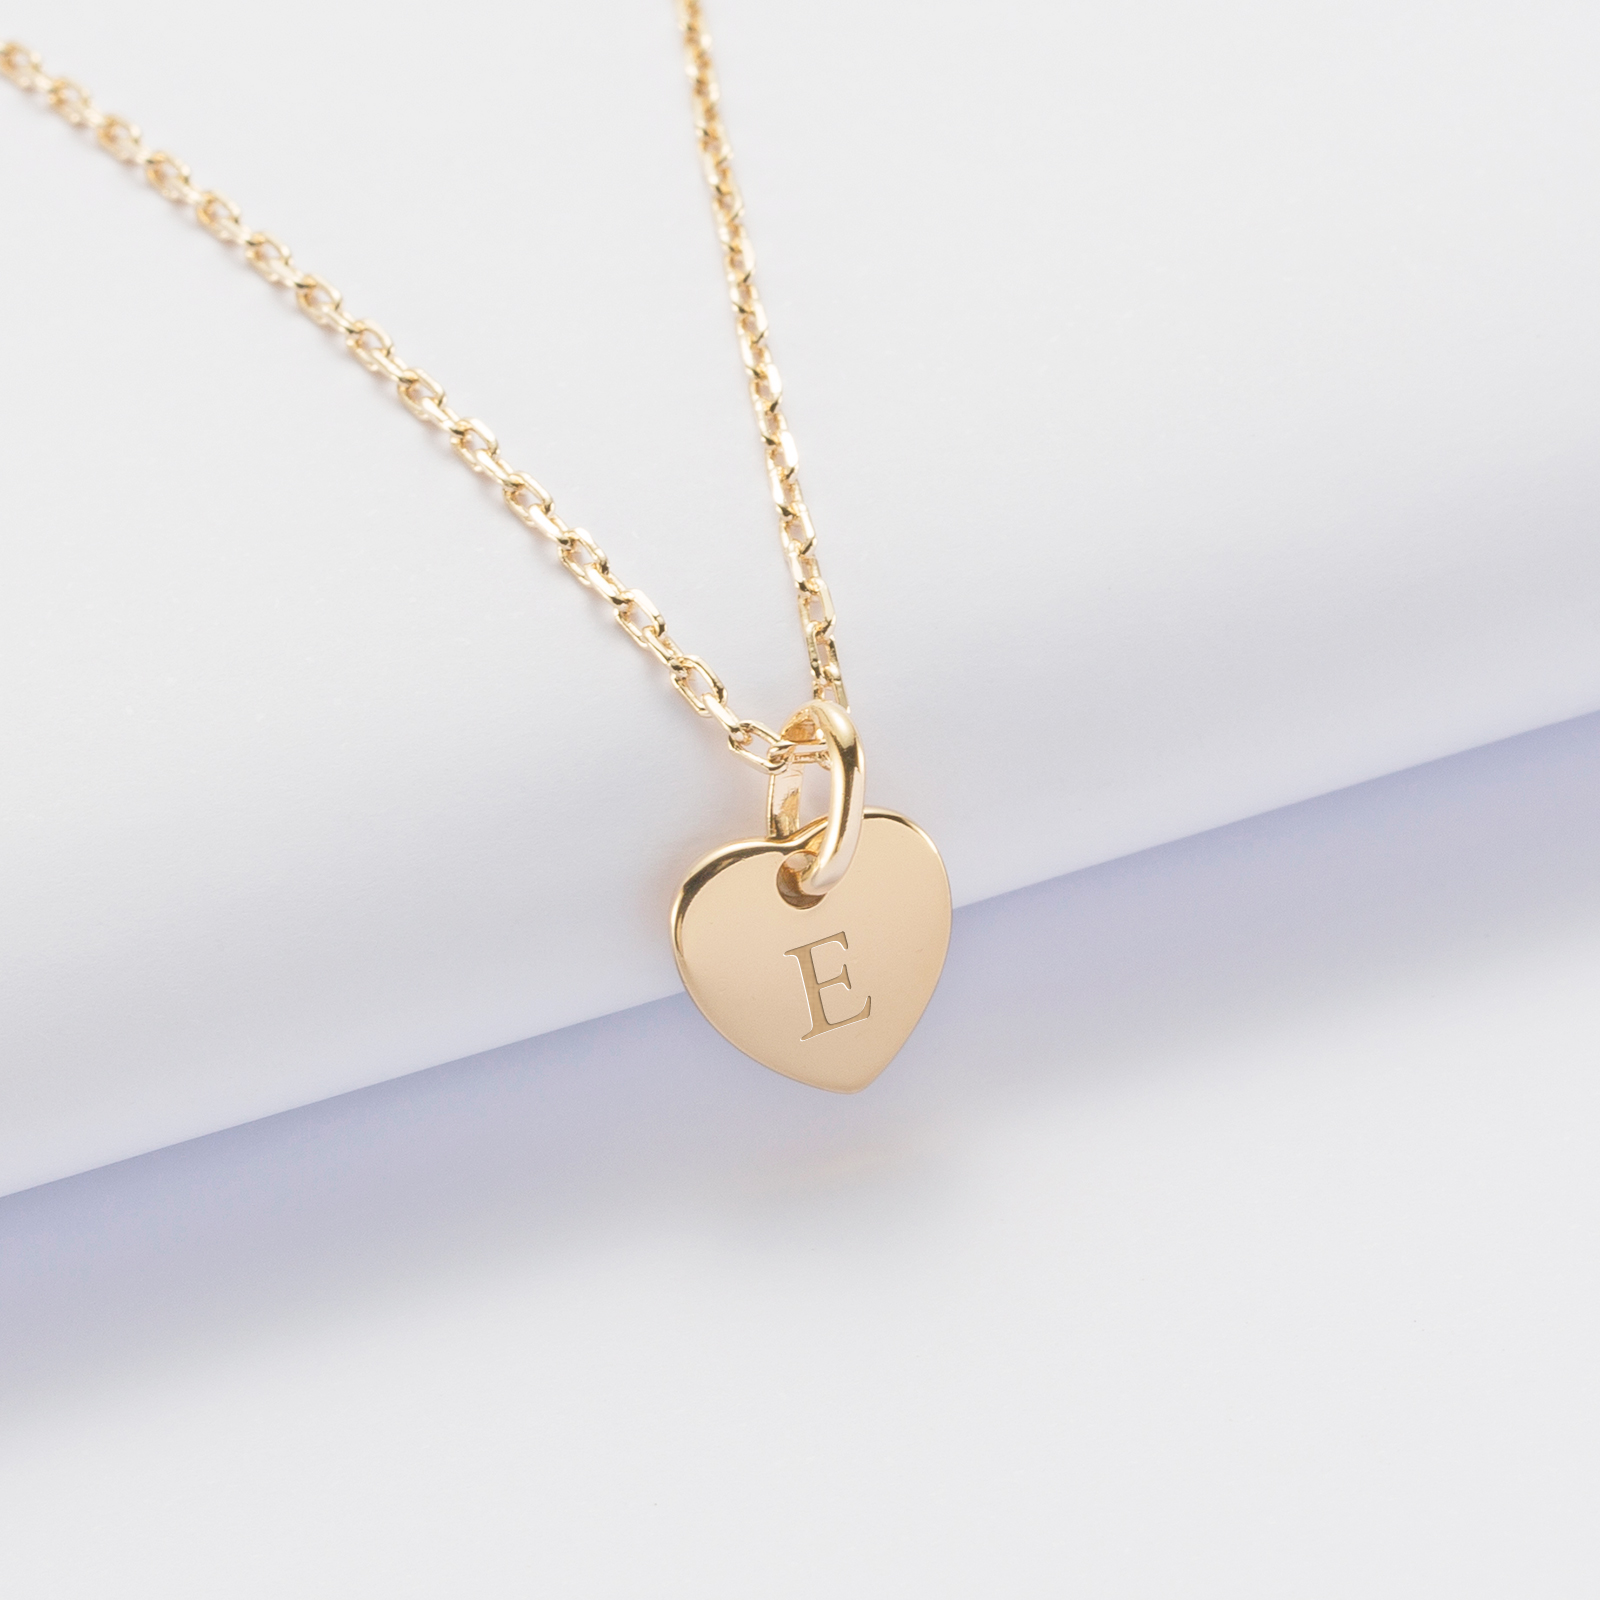 Personalised engraved gold plated heart initialled medallion pendant 10mm - 1